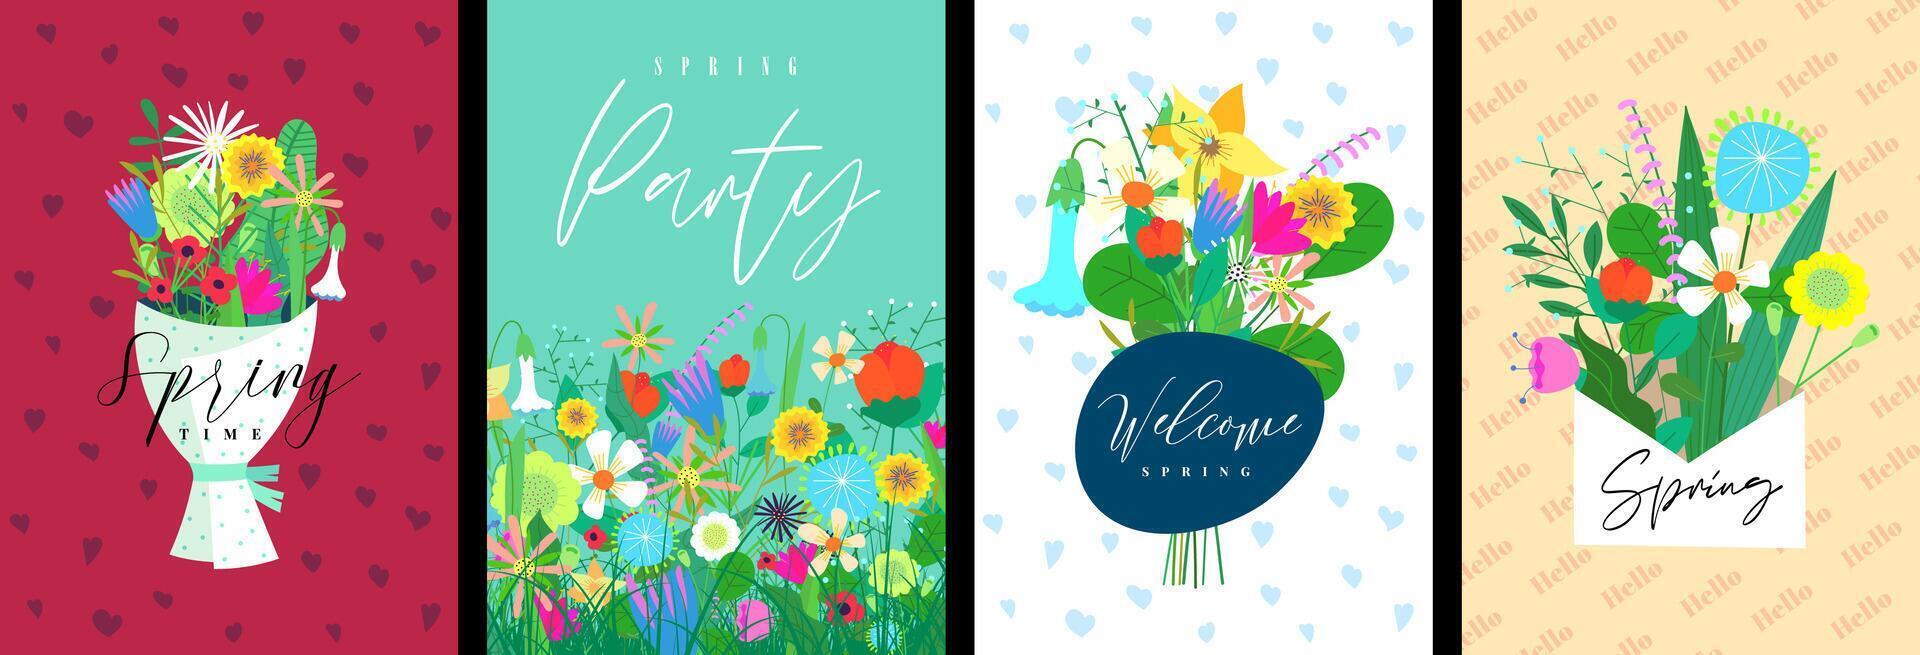 Hello spring abstract flowers bouquet and meadow poster. Floral hand drawn art march women holiday placard set. Springtime artistic print. Springtime herbal plants postcard. Vector eps illustration